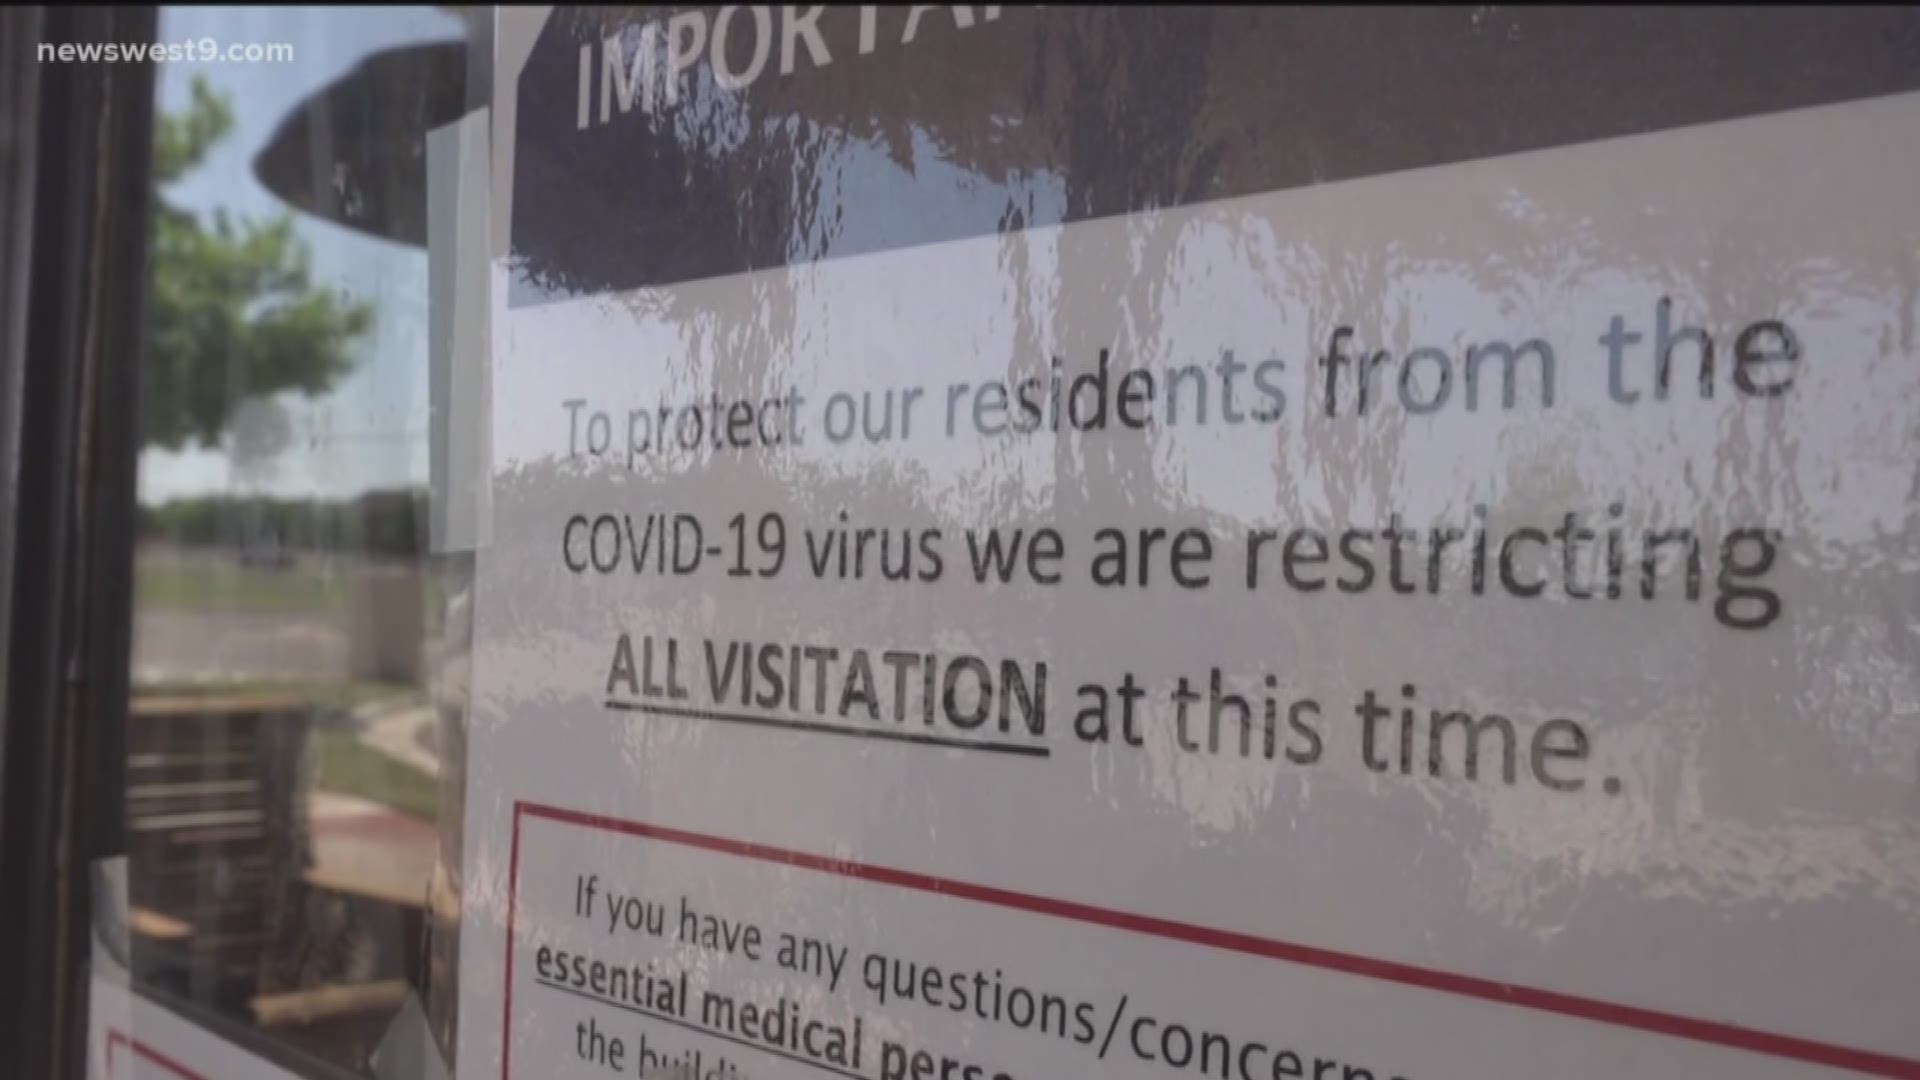 Texas Department of Health and Human services have stepped in and are making sure Midland Medical Lodge staff are receiving infection control in-service training.